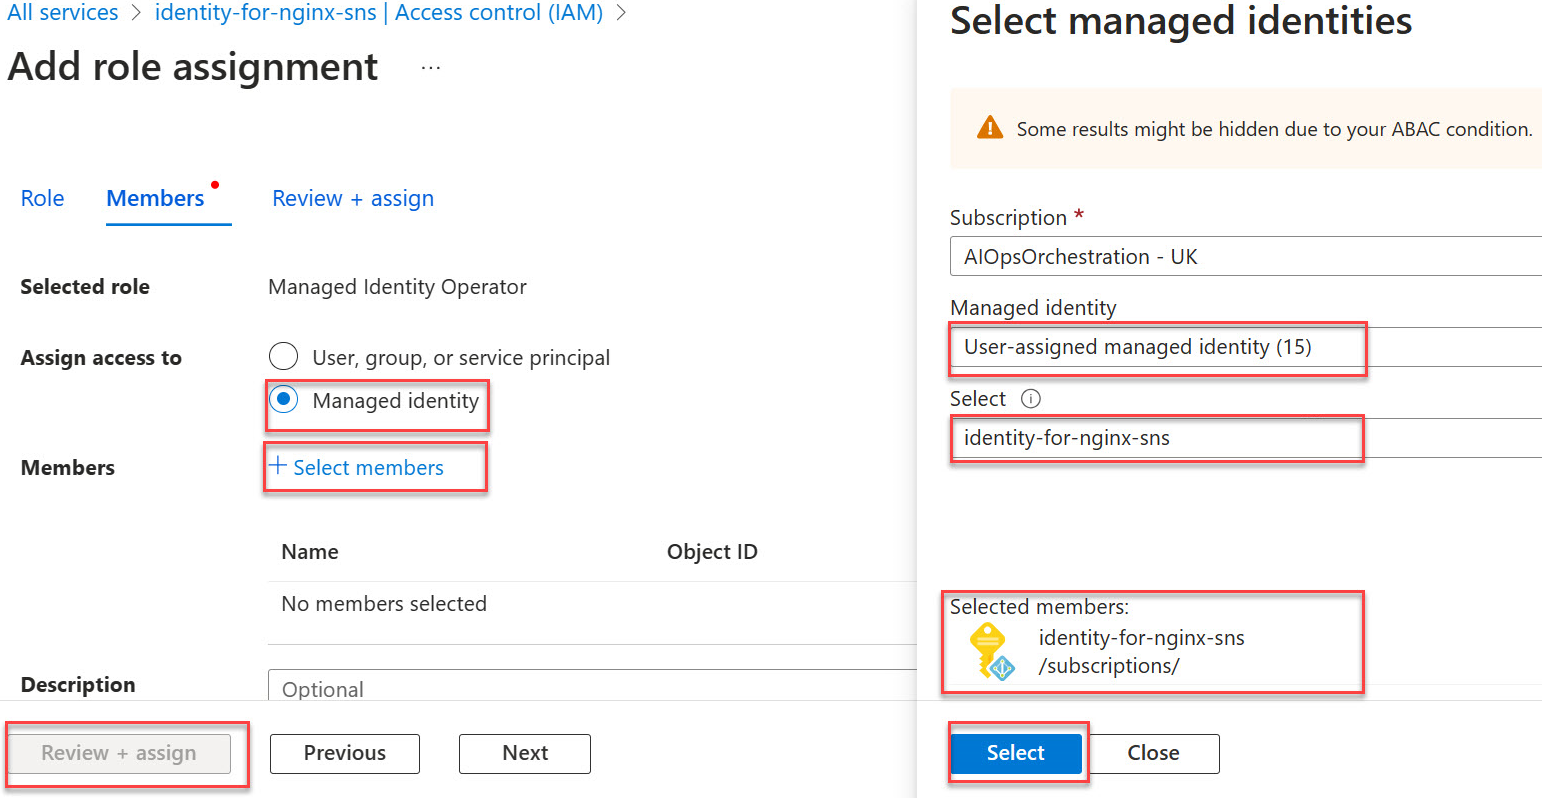 Screenshot showing the select managed identities with user assigned managed identity.